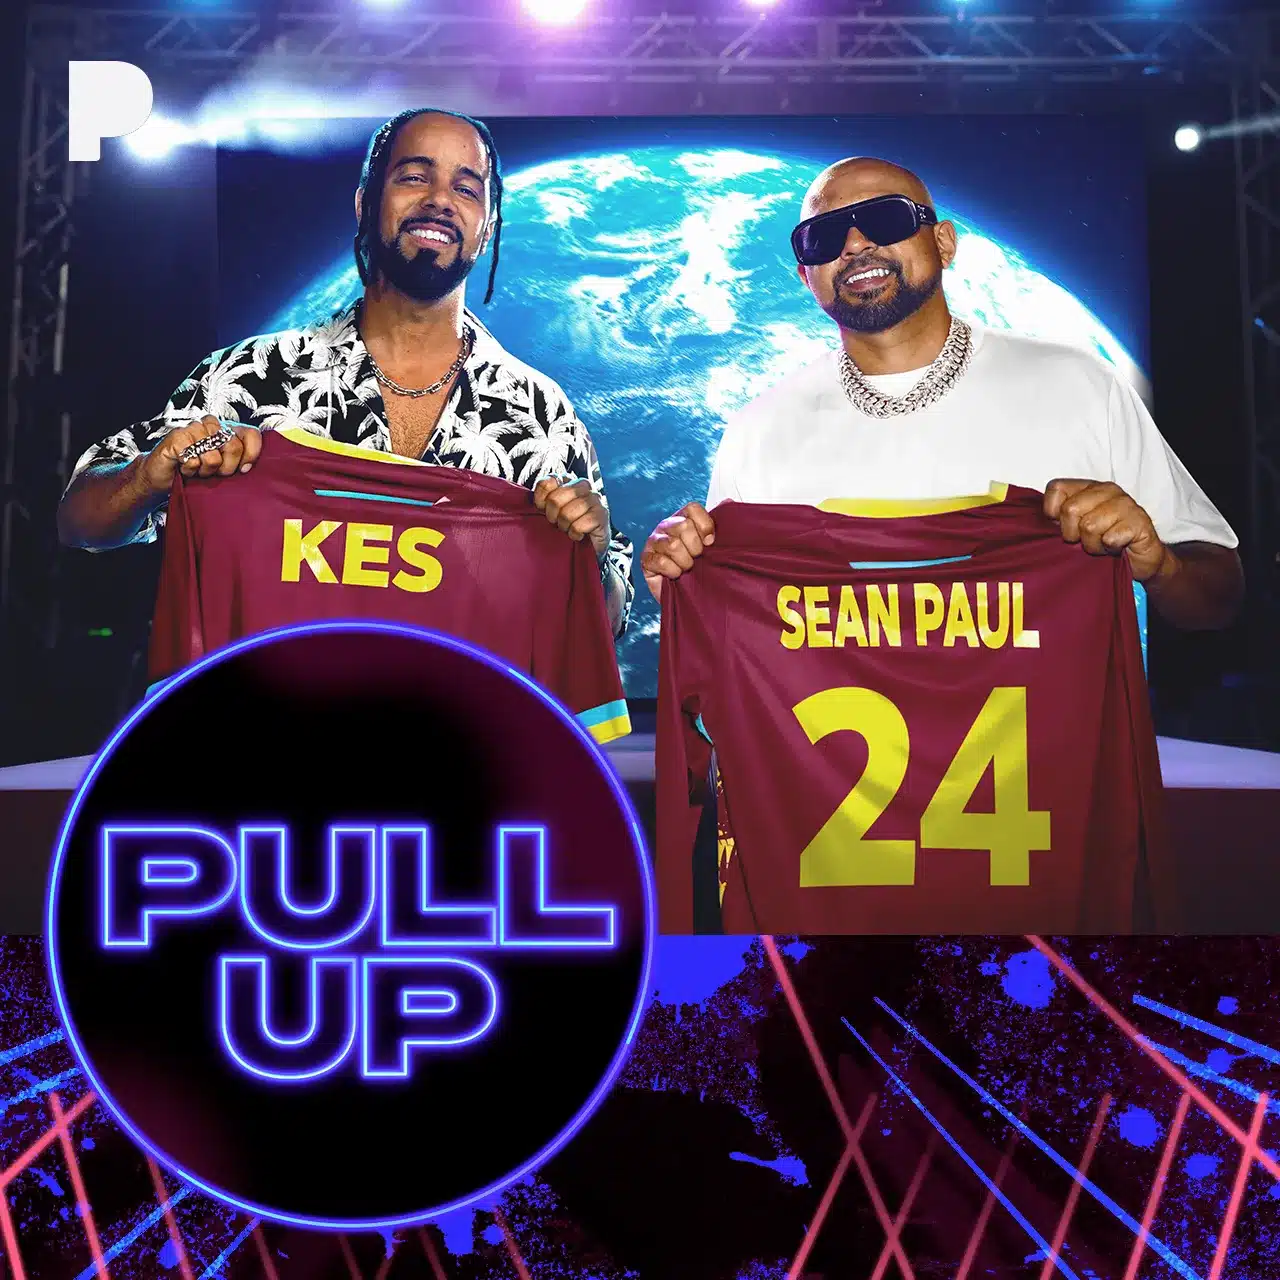 Two men holding jerseys with "Kes" and "Sean Paul 24" written on them, posing in front of a backdrop featuring an image of Earth. Text below them reads "PULL UP. This event could easily serve as a Grace Gaustad case study in merging music with global impact imagery.